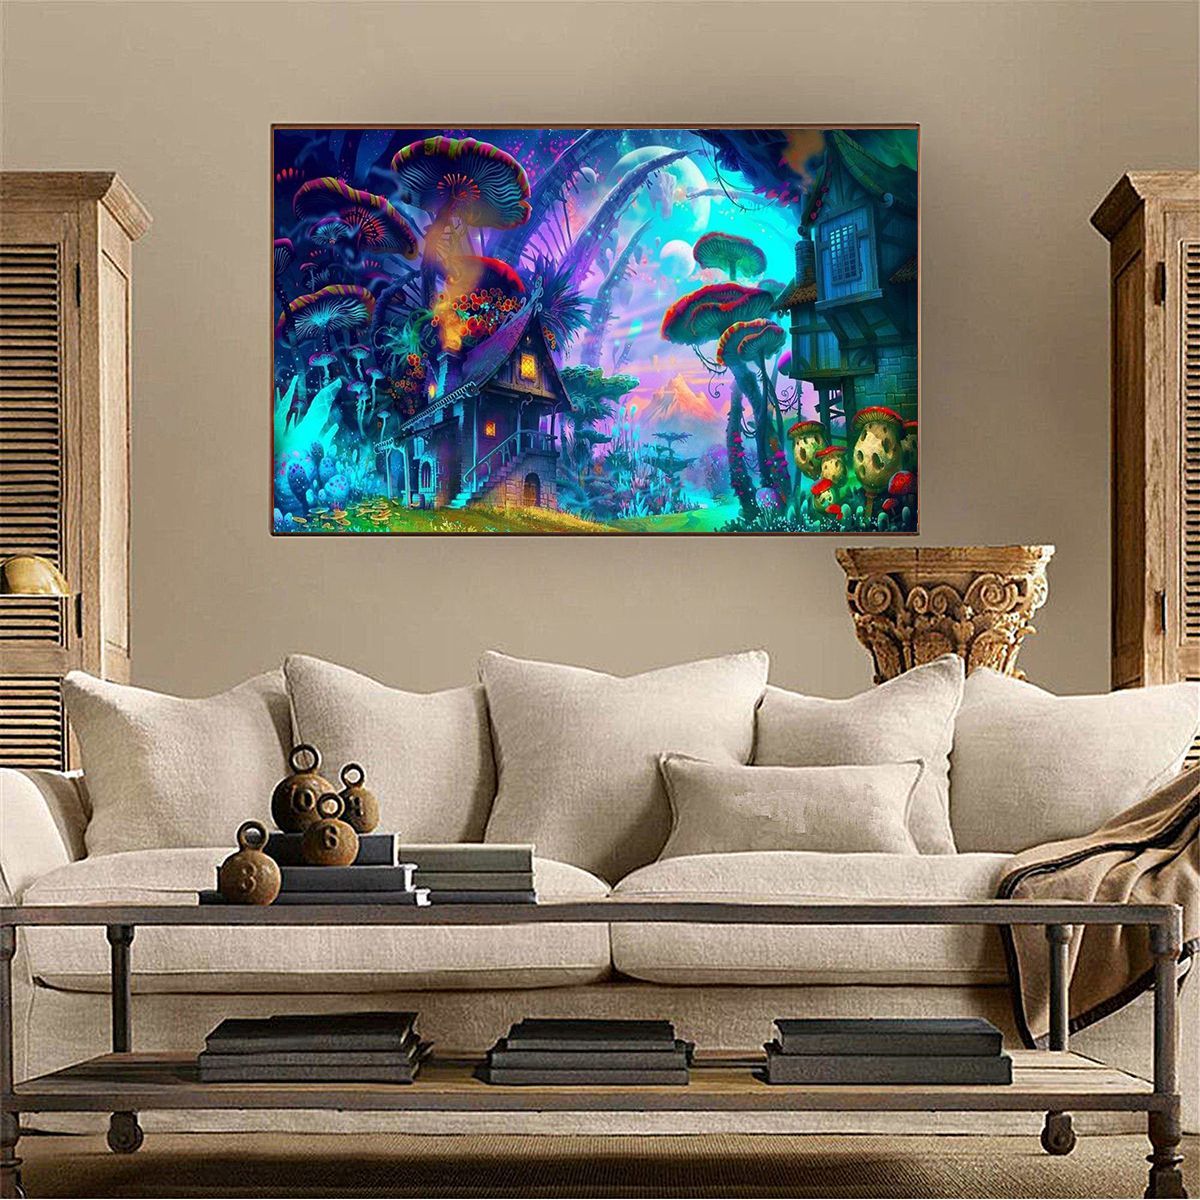 24x36-Psychedelic-Mushroom-Town-Art-Print-Fabric-Silk-Poster-Wall-Home-Decorations-1618564